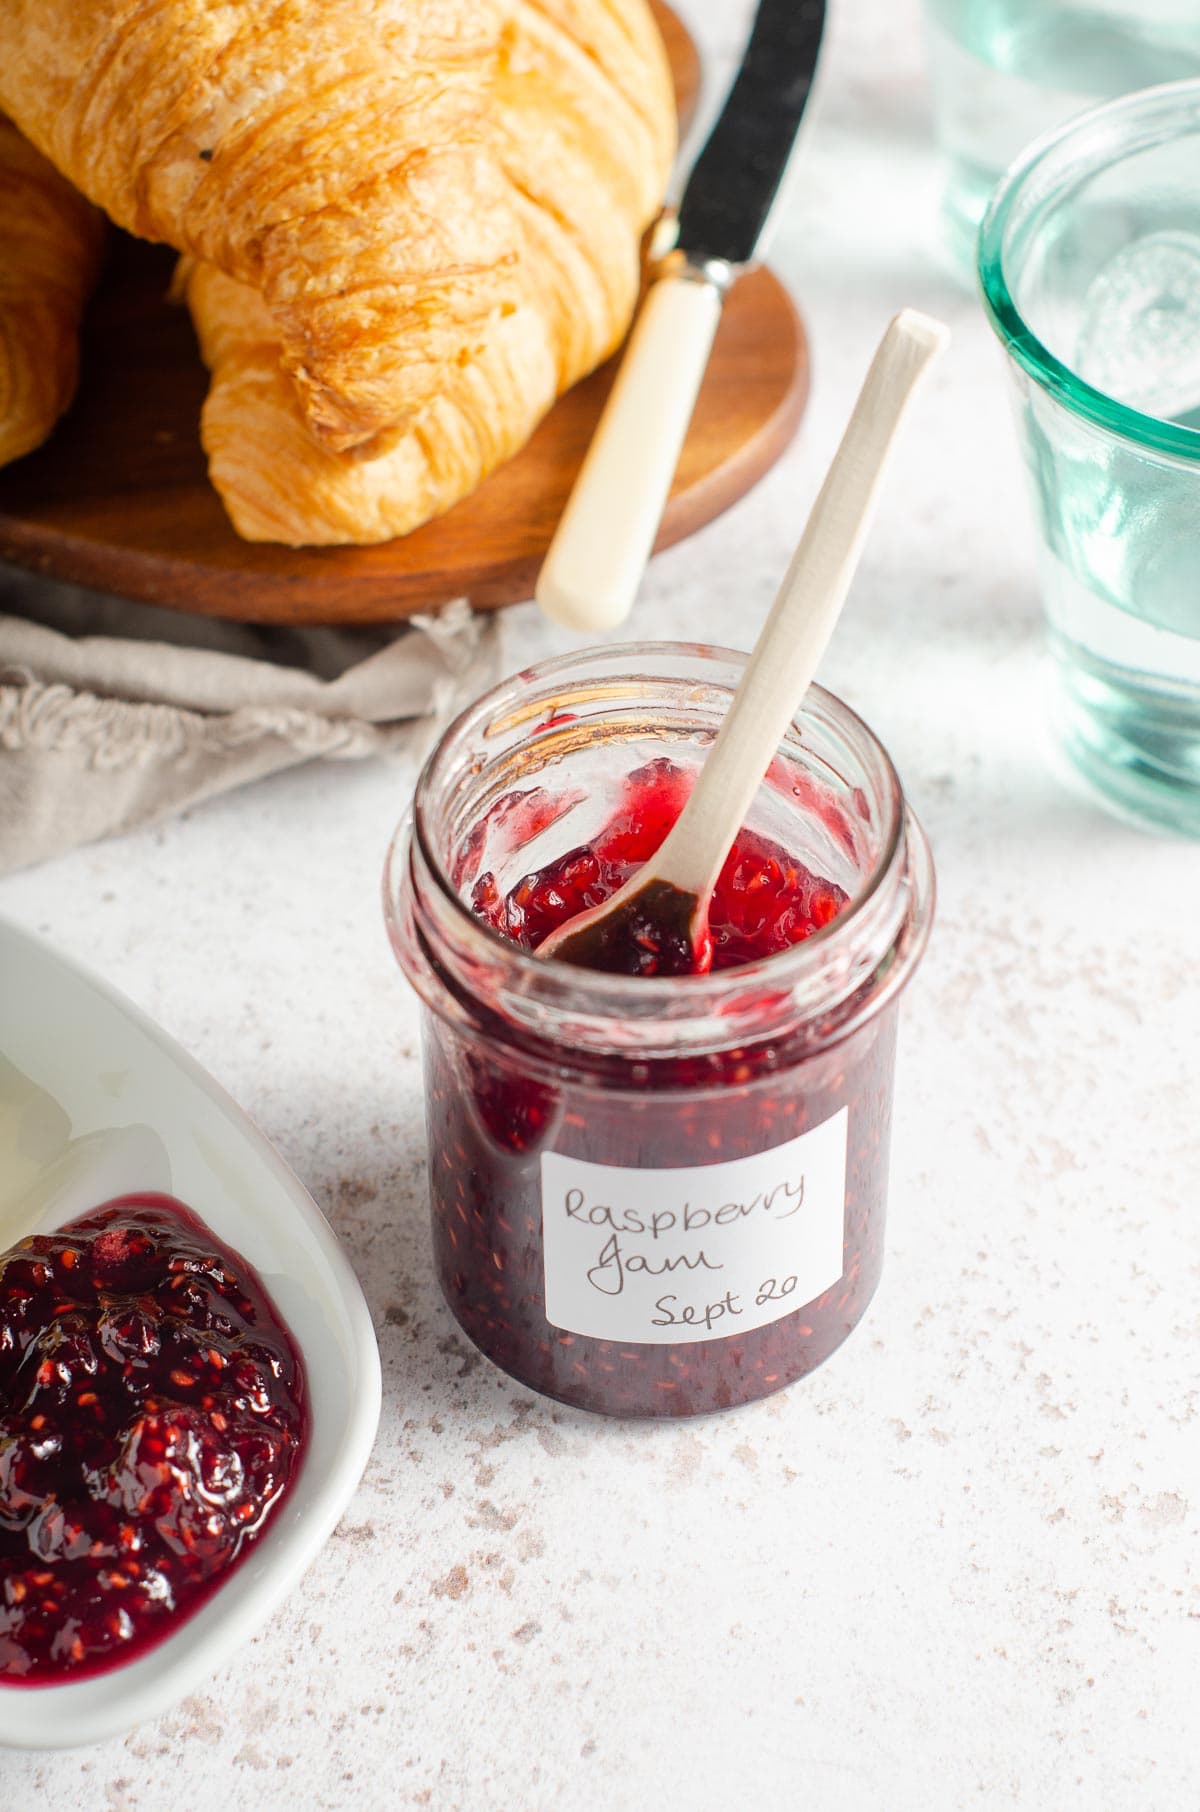 An open jar of homemade raspberry jam served with fresh croissants and butter.